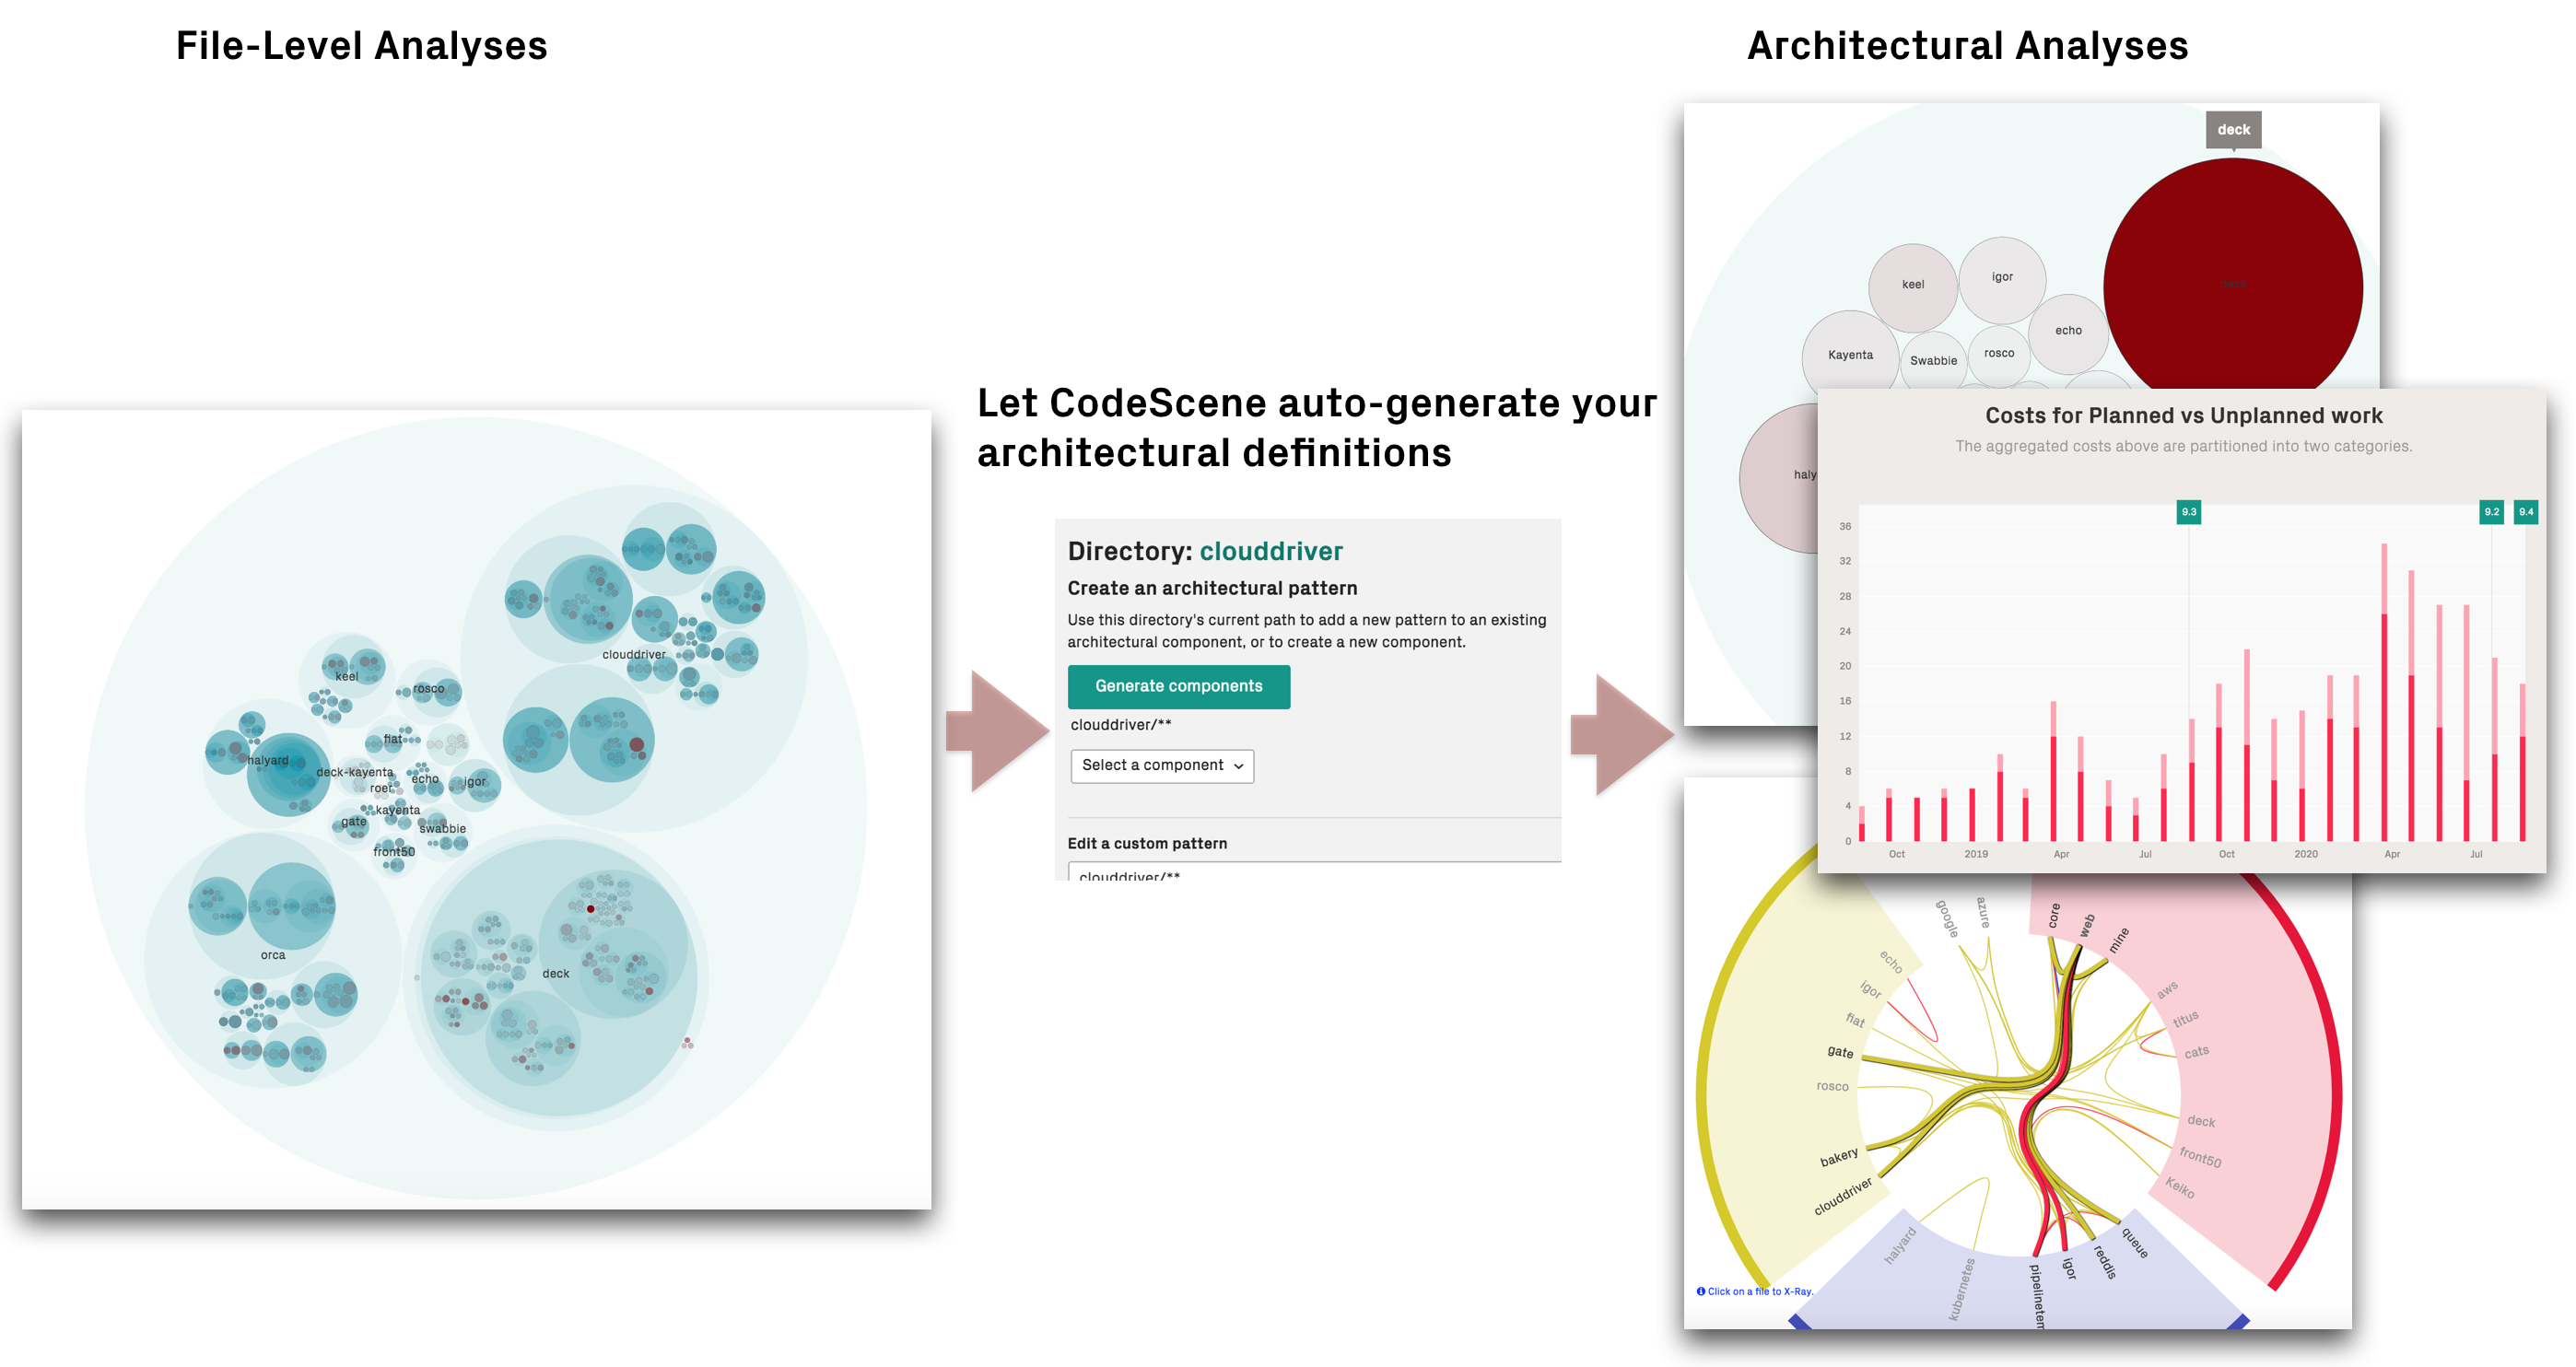 Enable the architectural analyses to get hotspots, code health, costs, and trends on a system level.